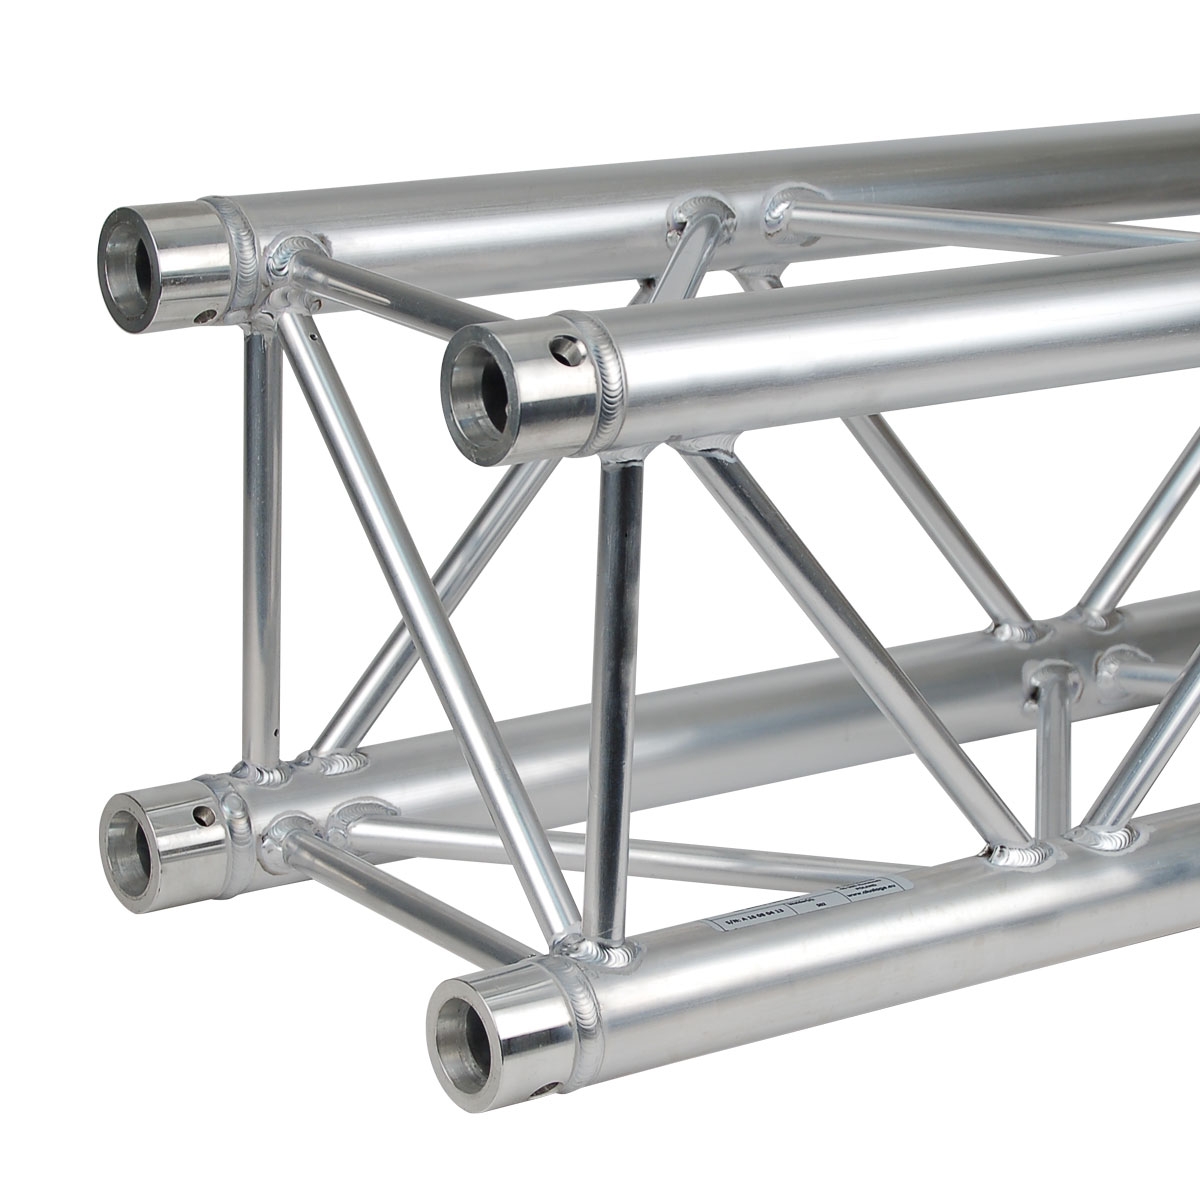 Square aluminium truss - Heavy duty - 290mm - Length 200cm - <strong>Connection kit included</strong>